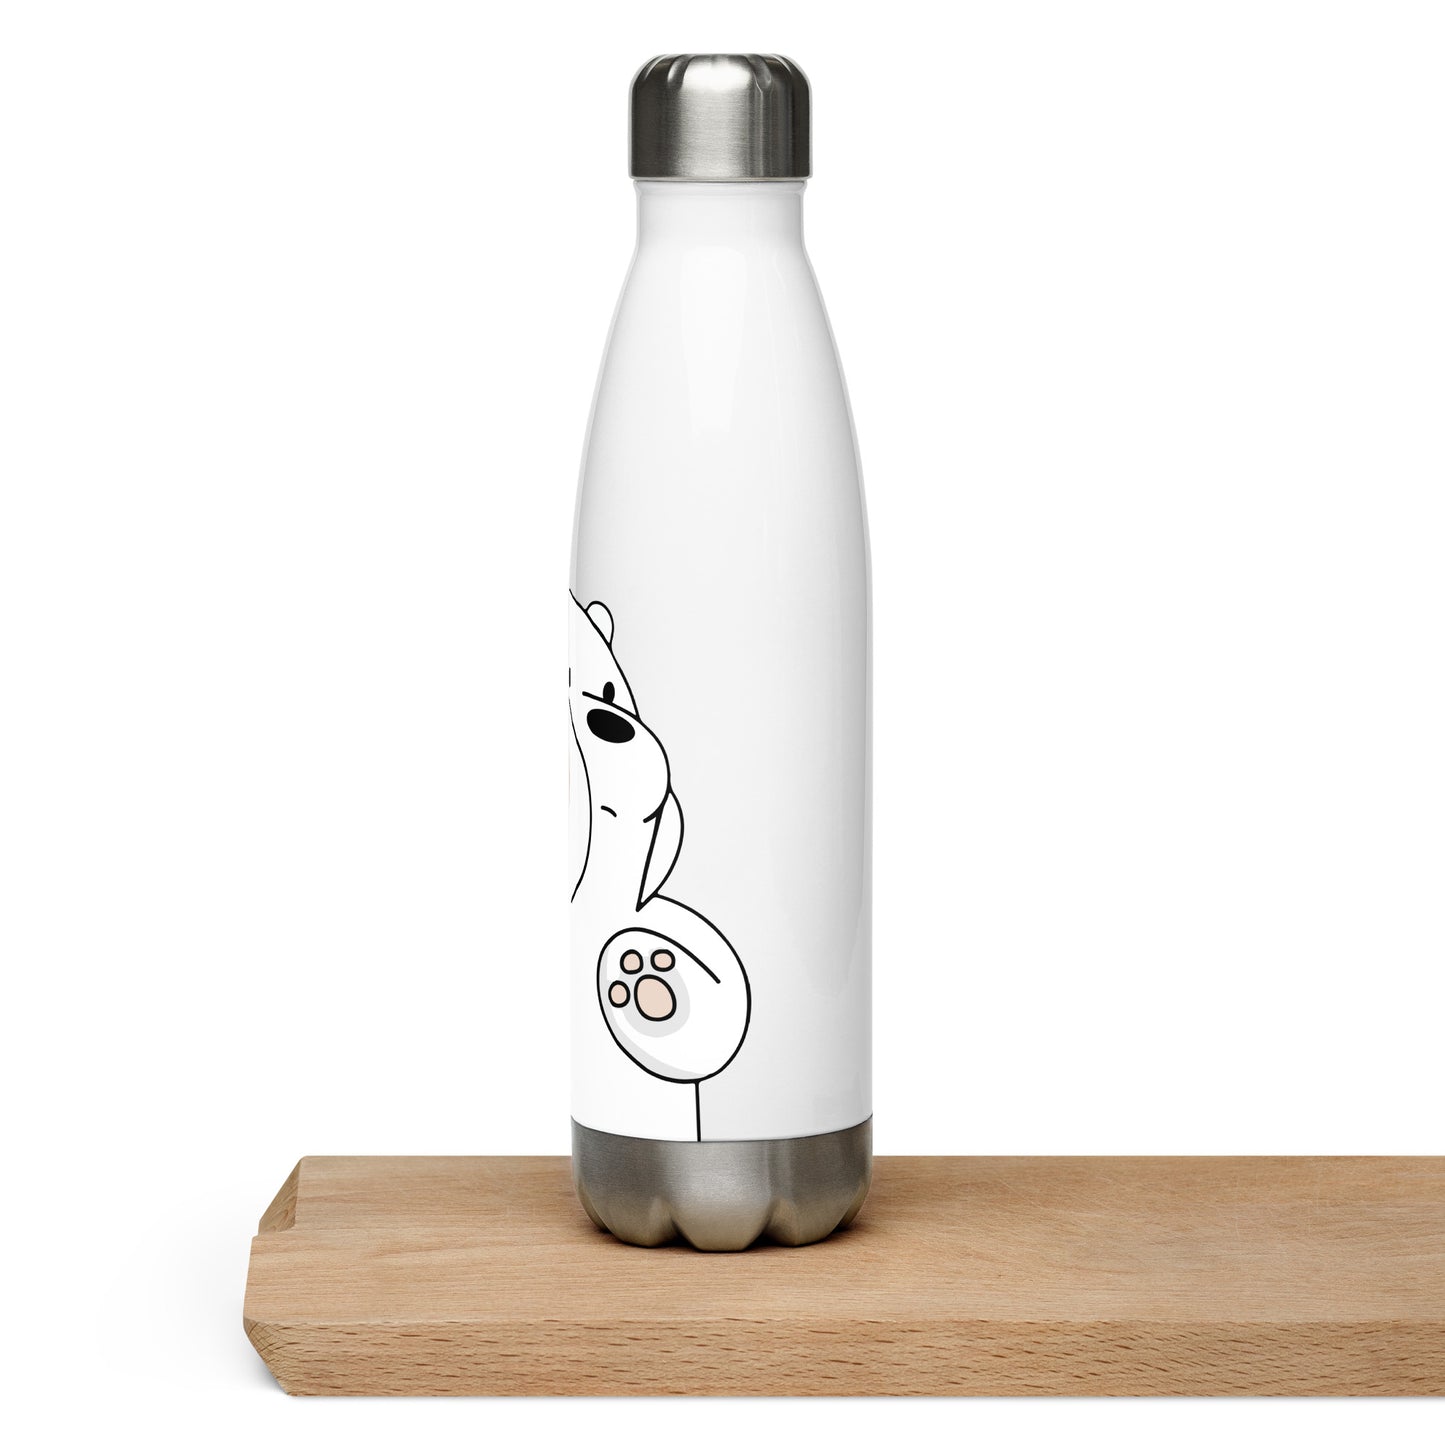 Stainless steel water bottle with Cute Polar Bear Design